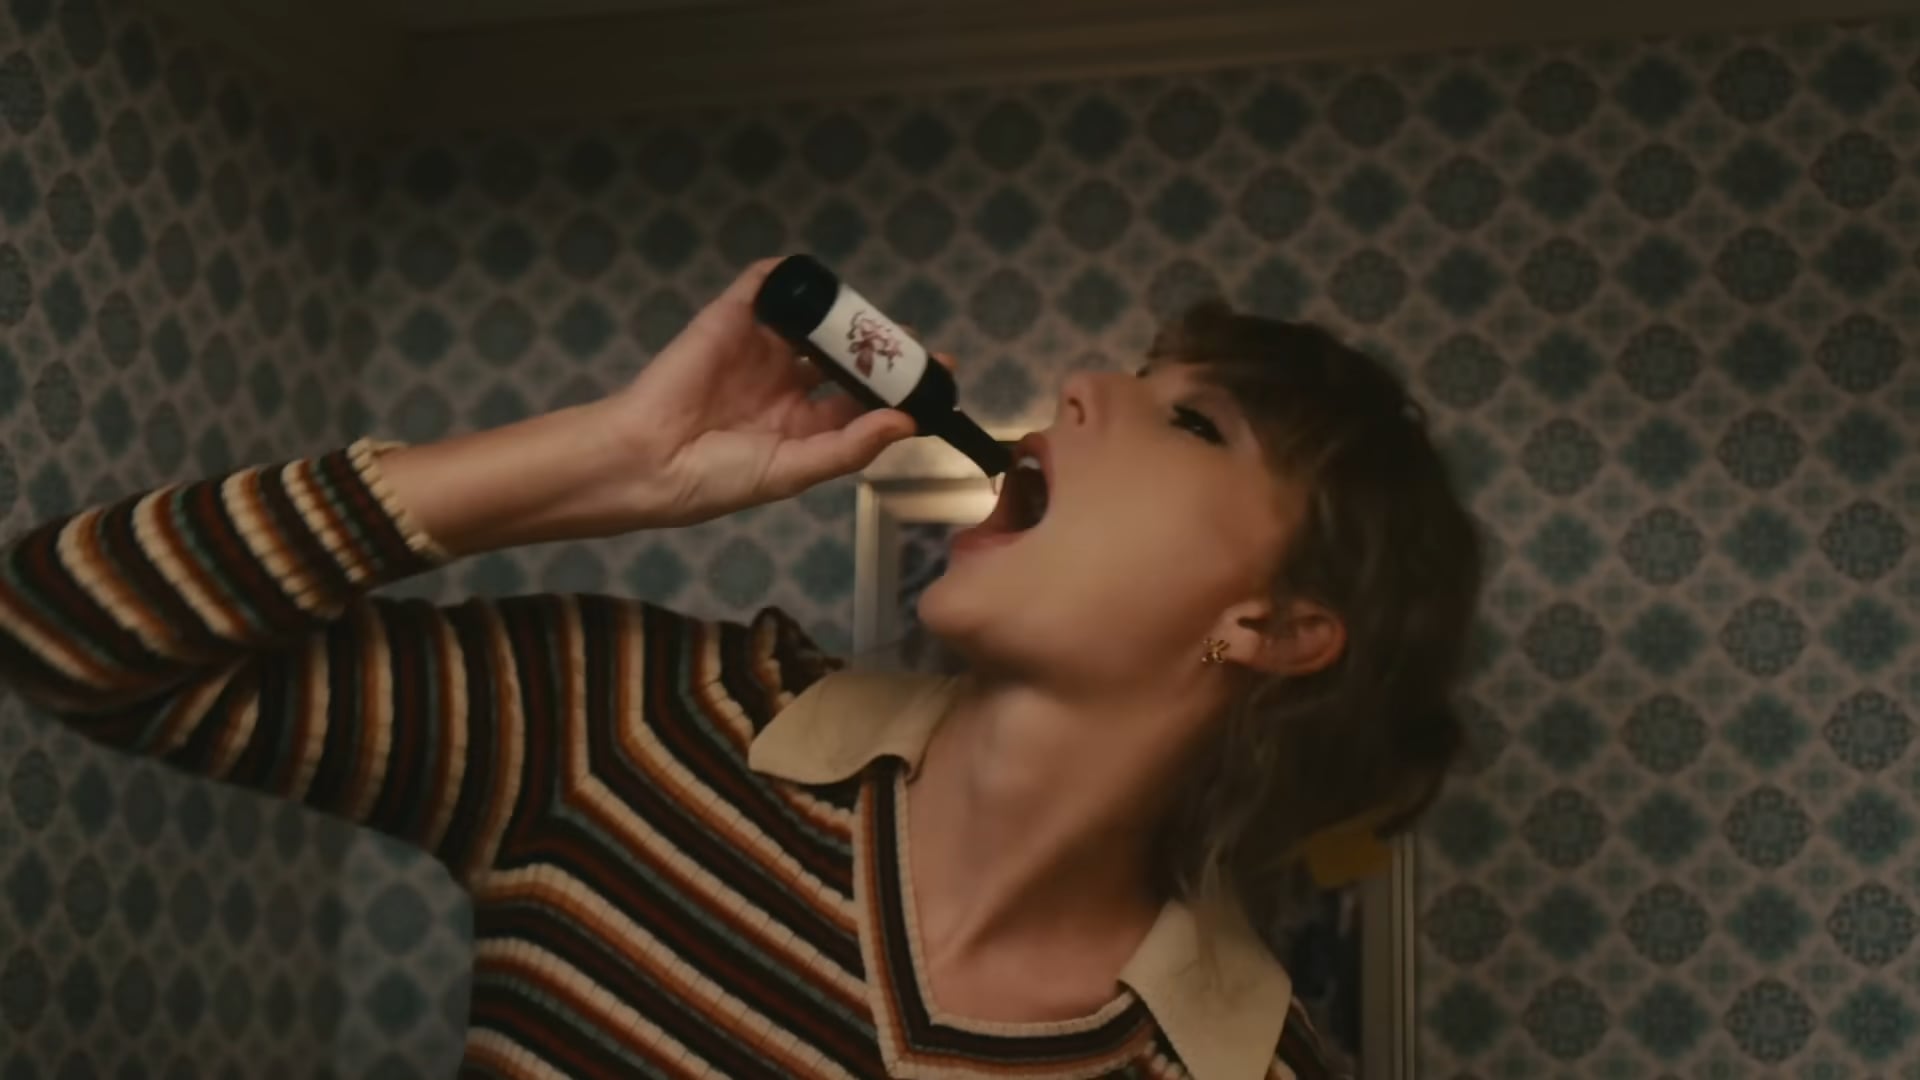 Giant Taylor Swift drinking from a tiny wine bottle